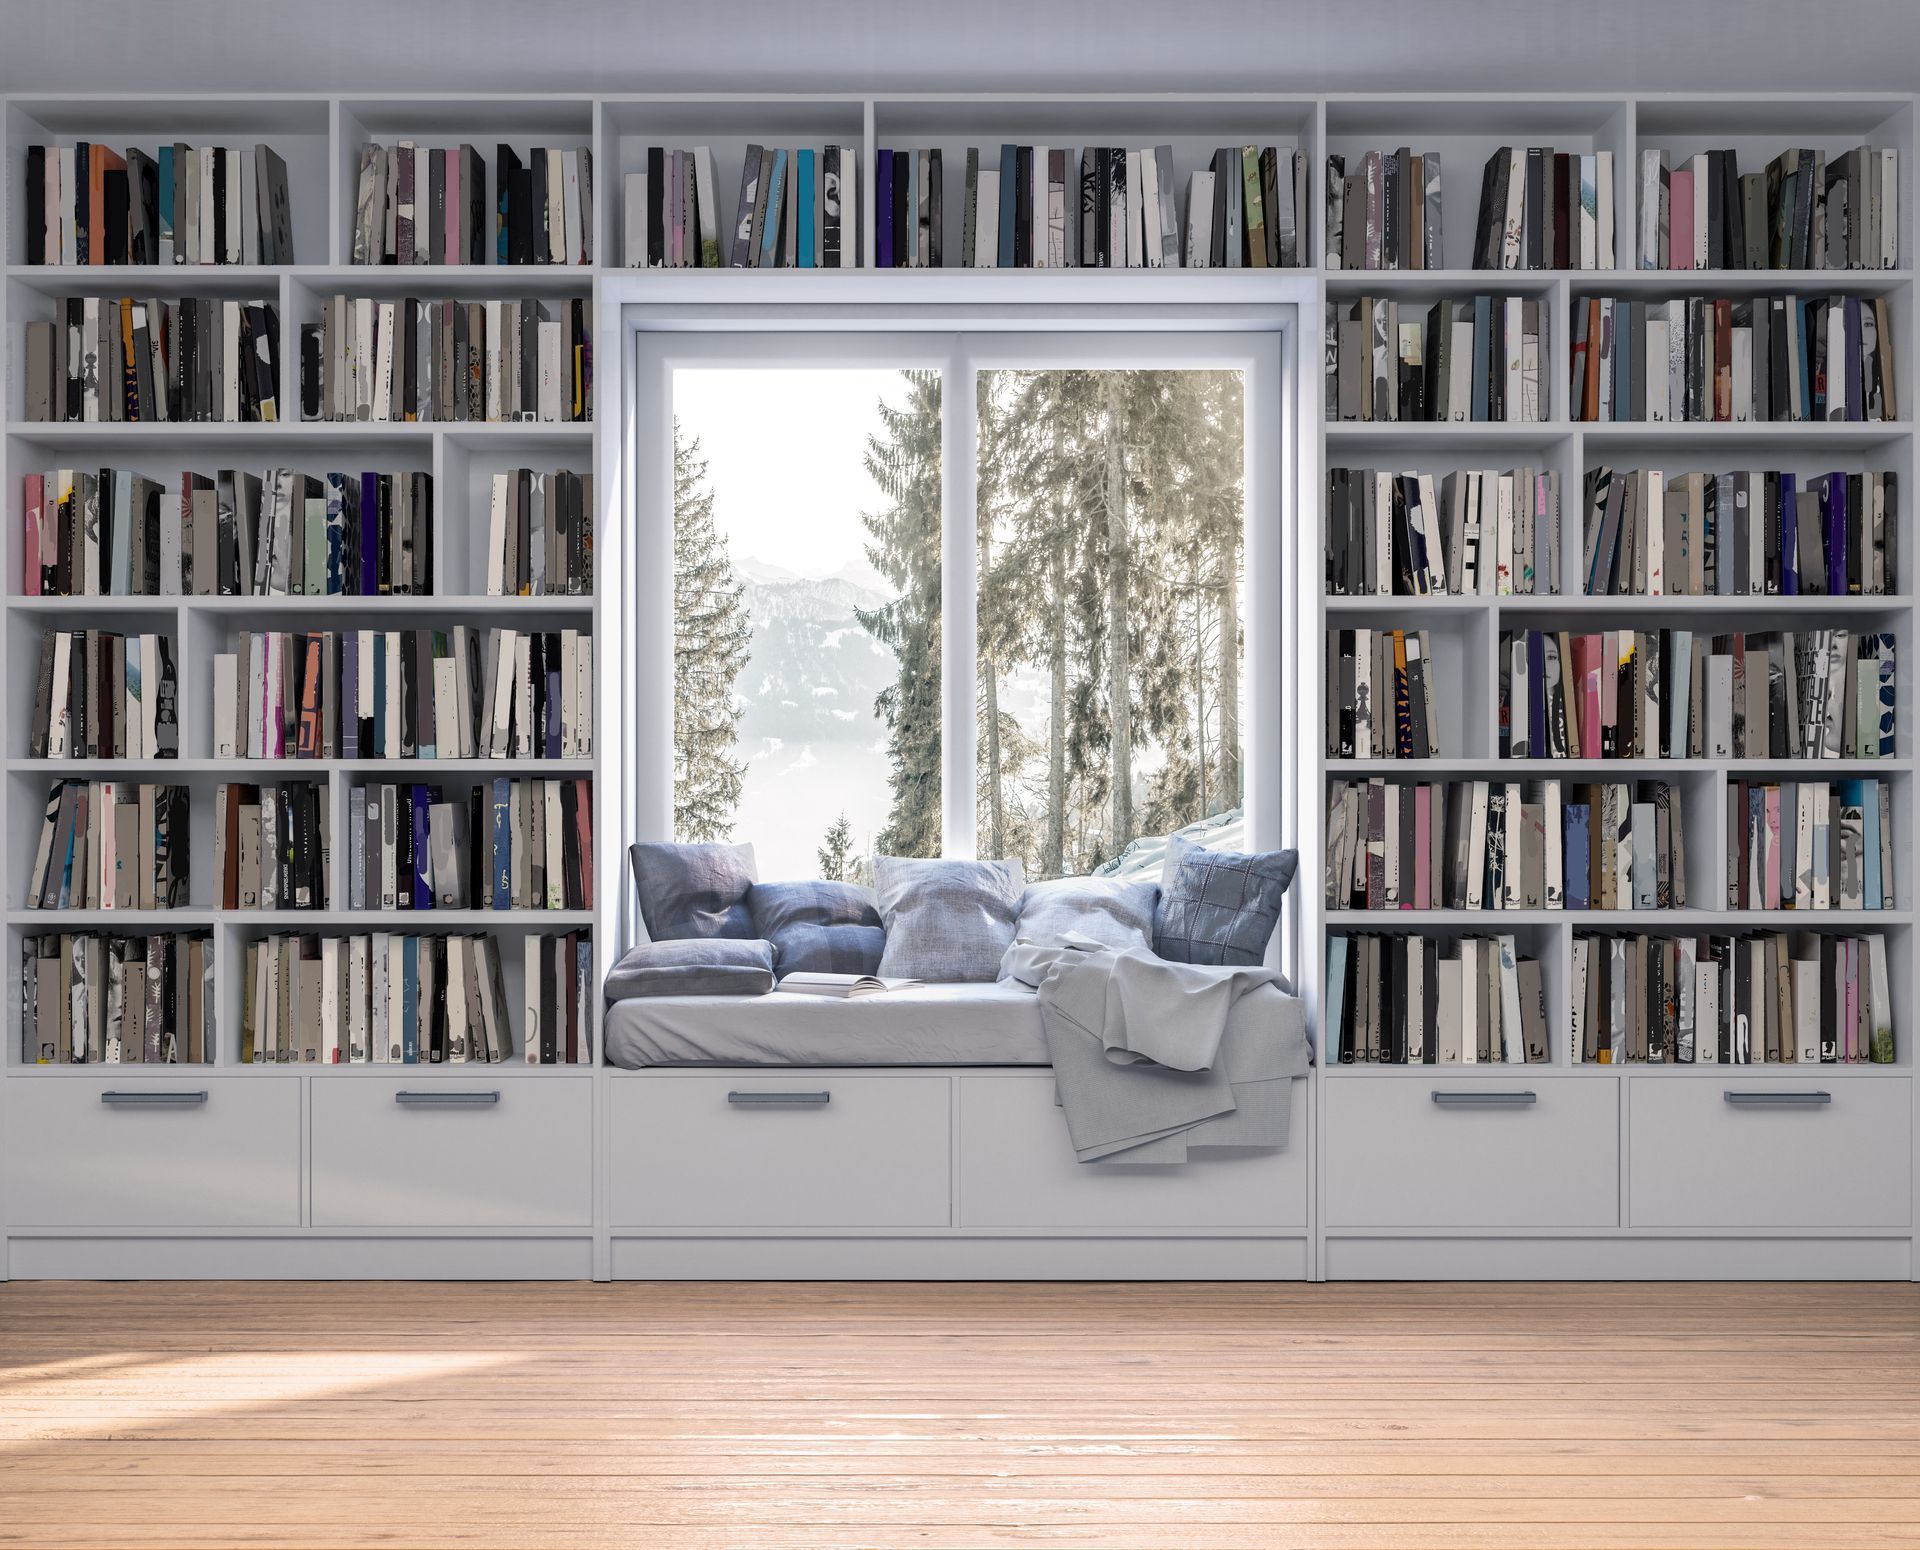 Window surrounded with book shelves and drawers below